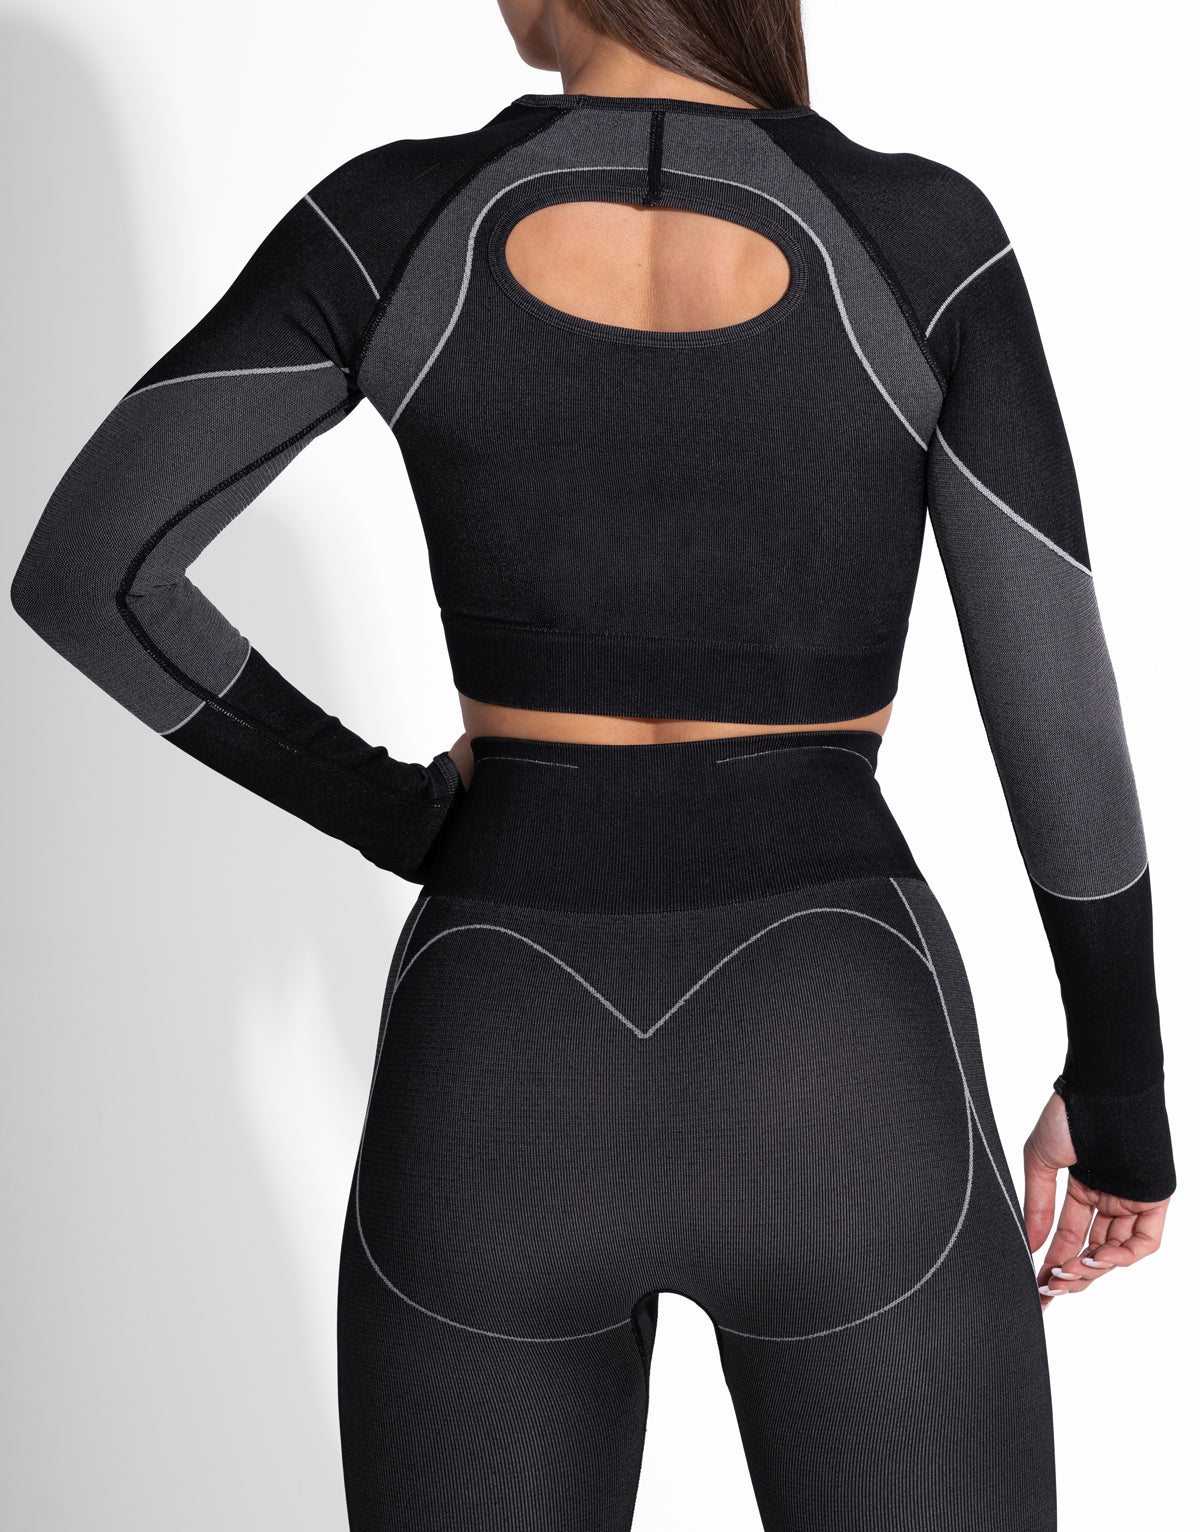 PACE LINES BLACK SEAMLESS TOP